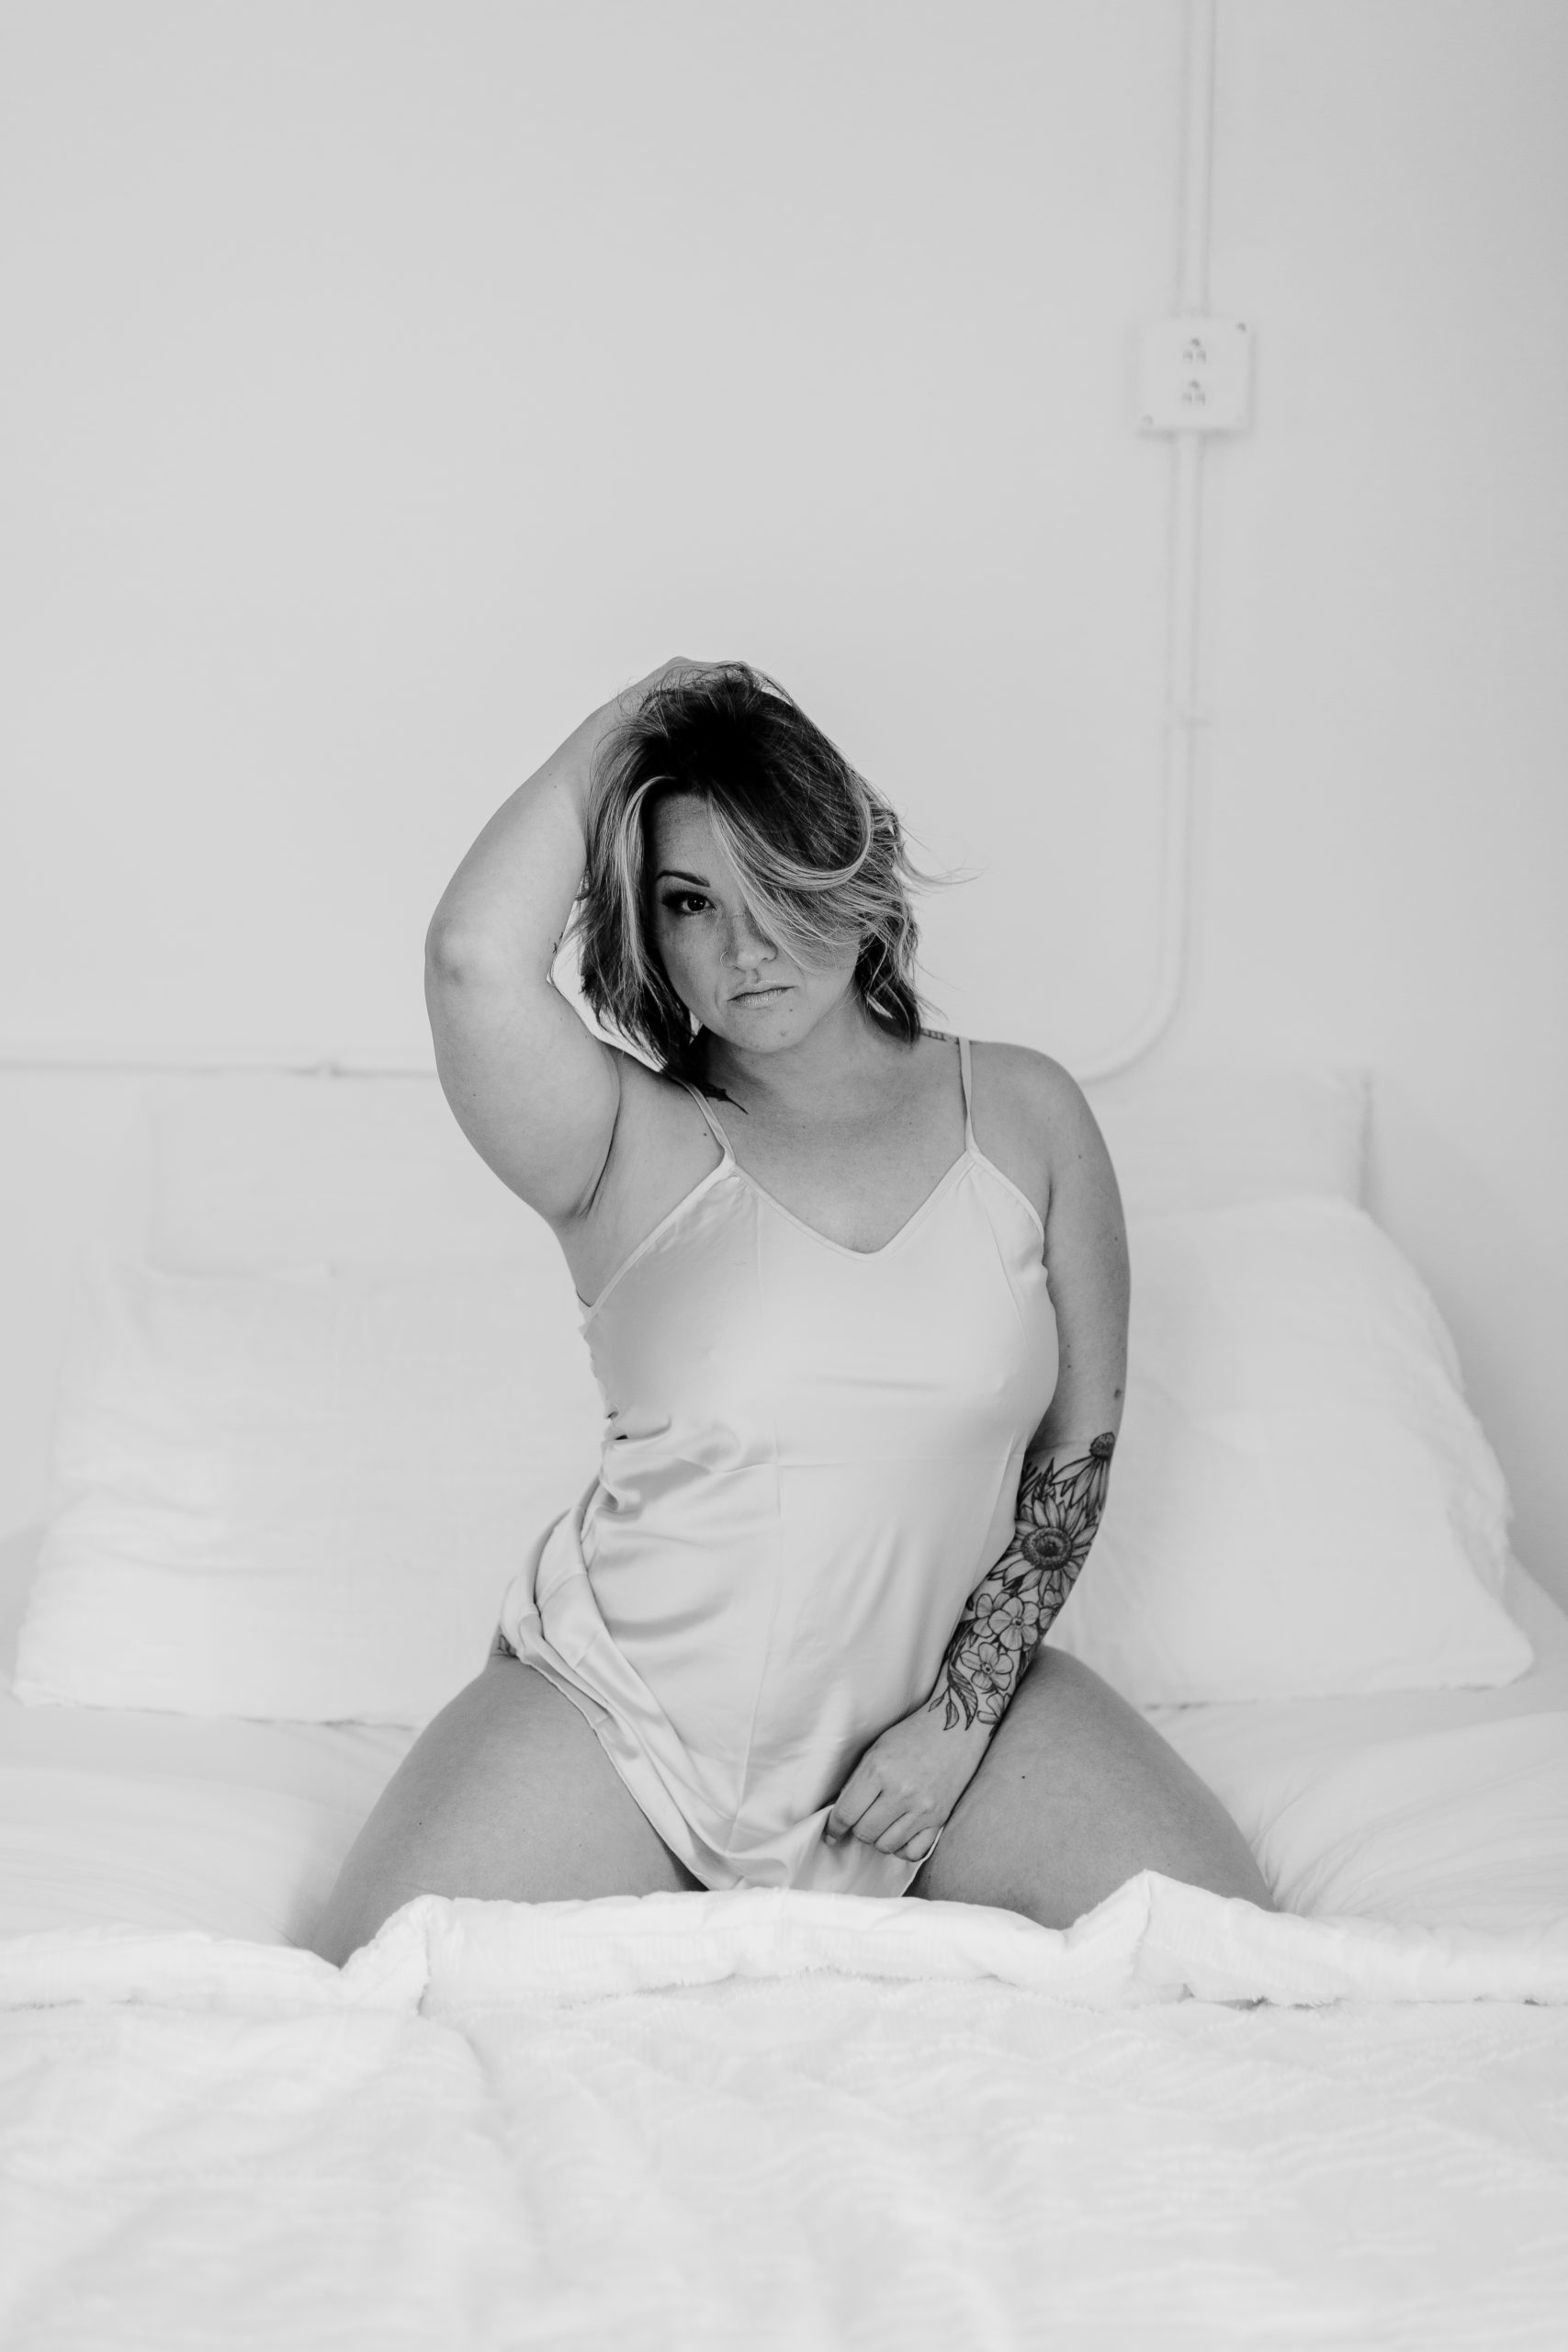 Boudoir session of a woman on a bed posing seductively